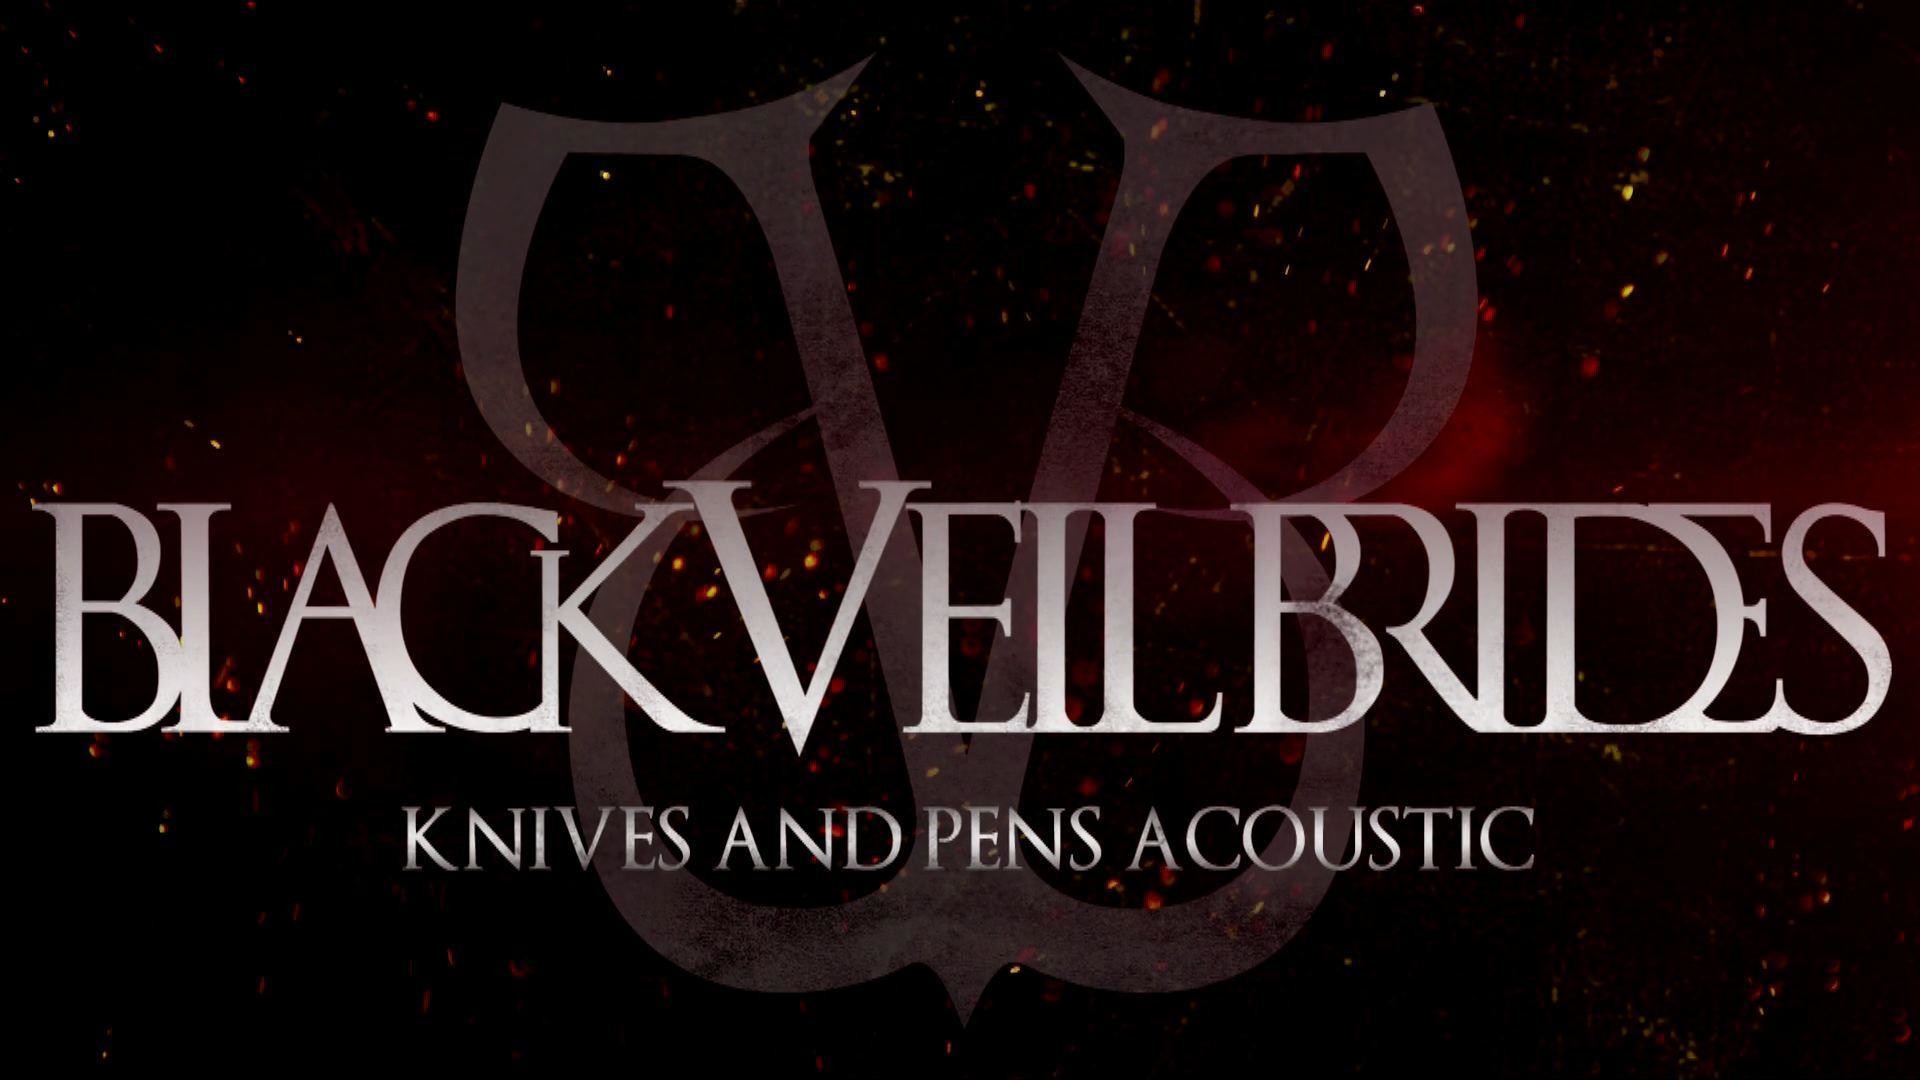 1920x1080 Black Veil Brides Wallpapers HD - The Image Deluxe